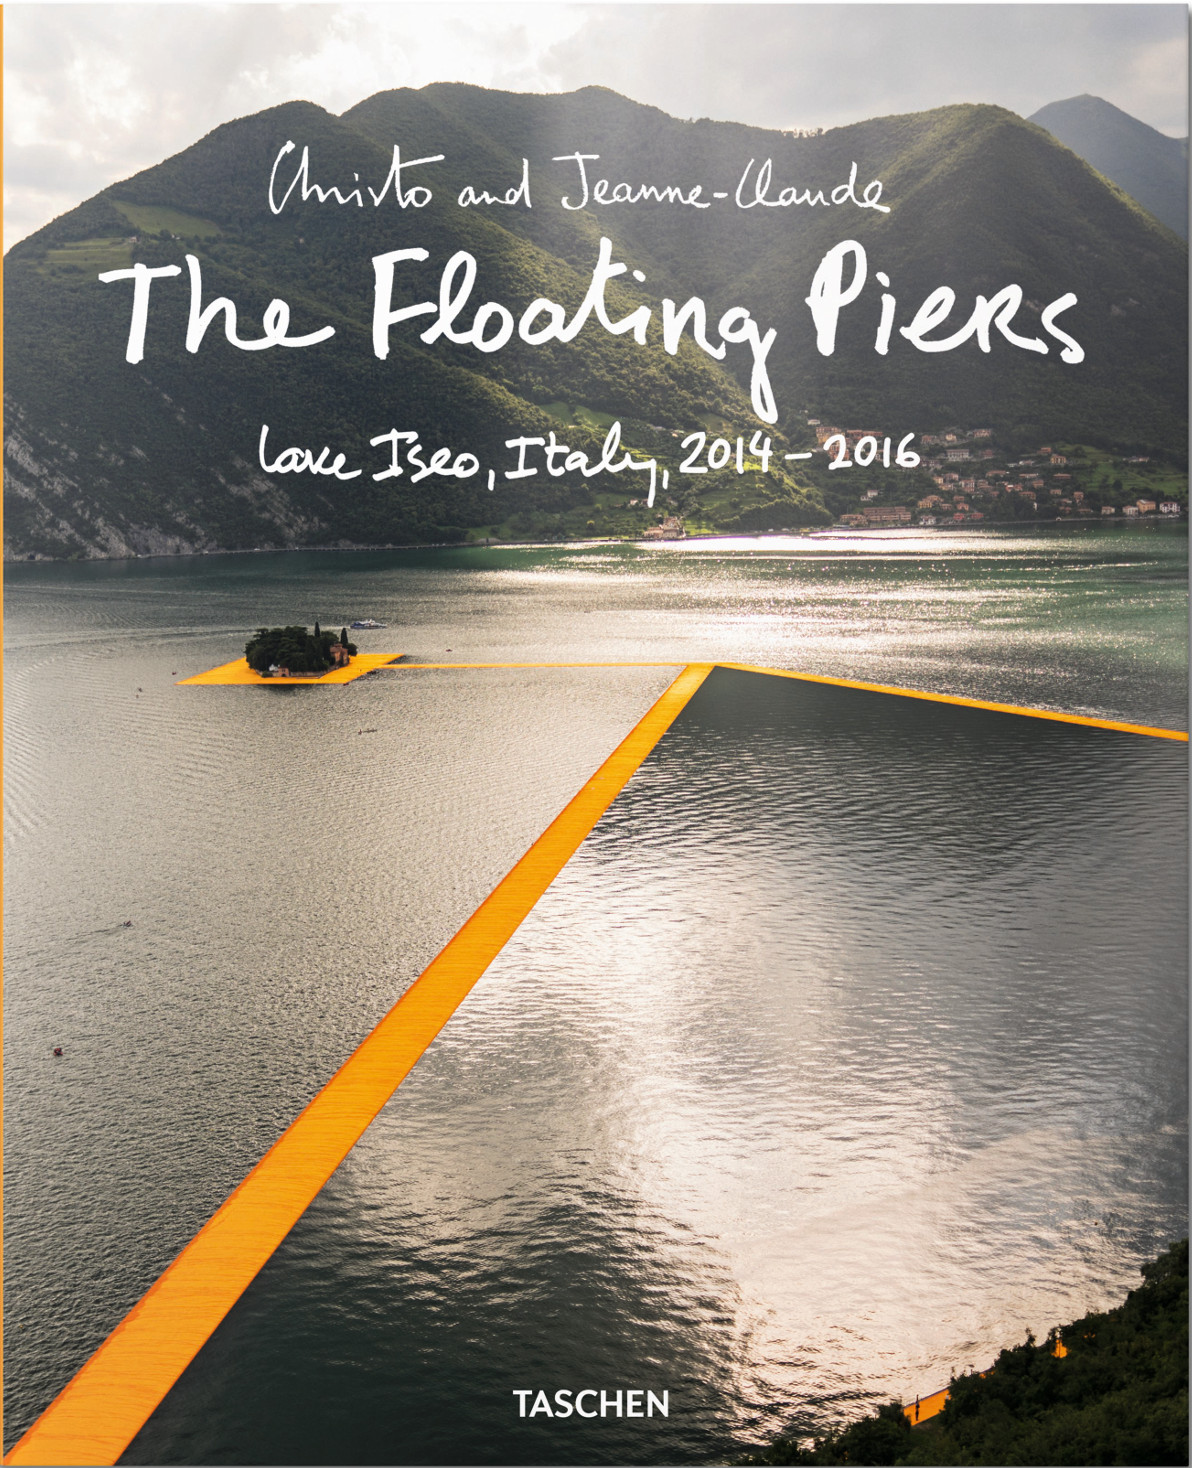 Christo and Jeanne-Claude || The Floating Piers